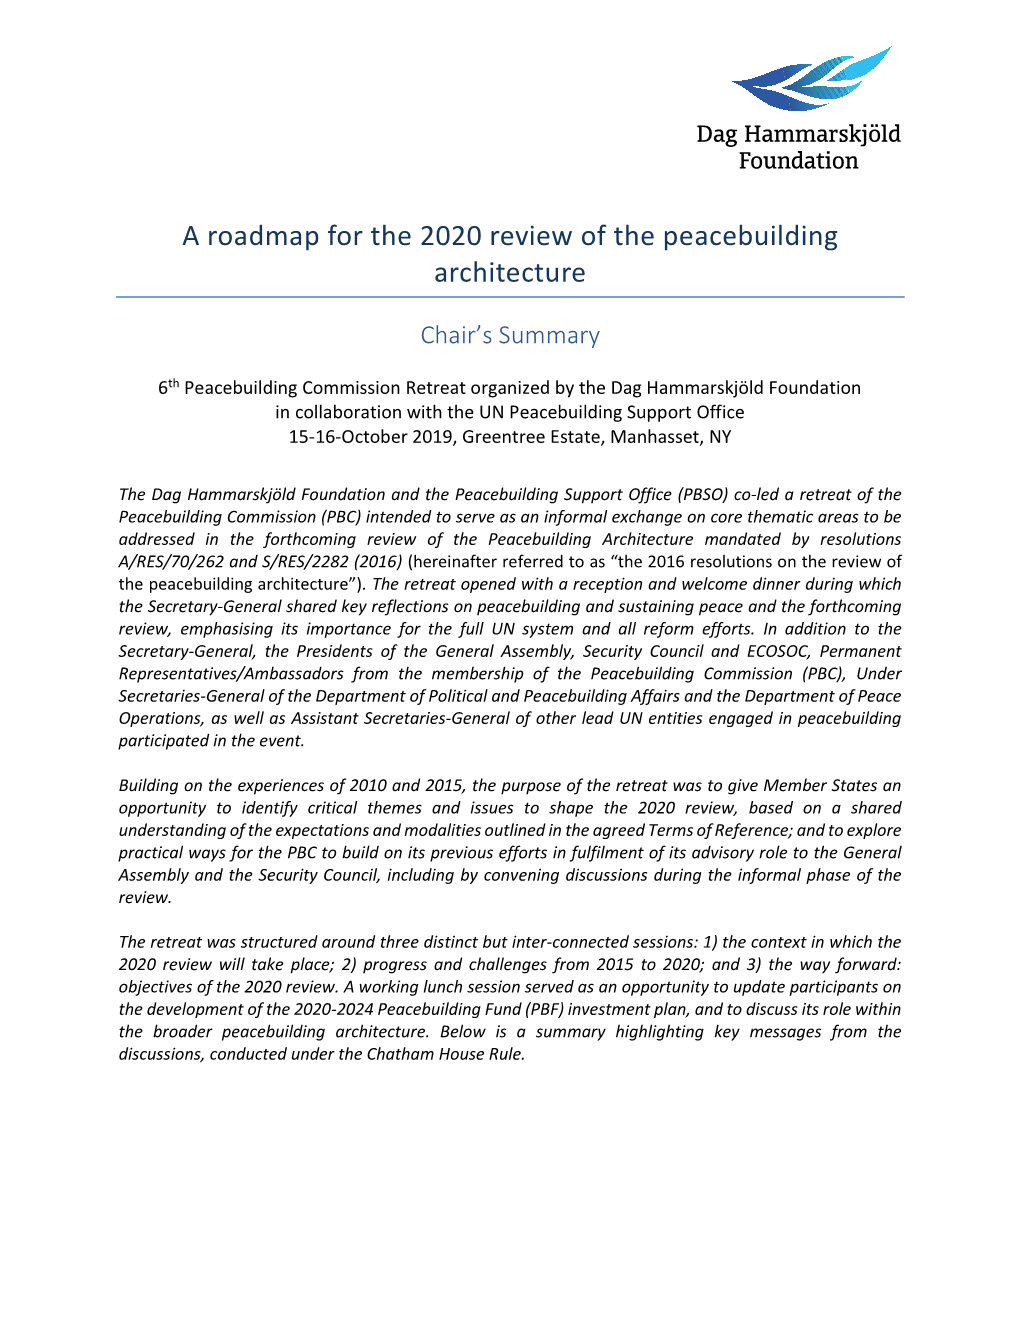 A Roadmap for the 2020 Review of the Peacebuilding Architecture